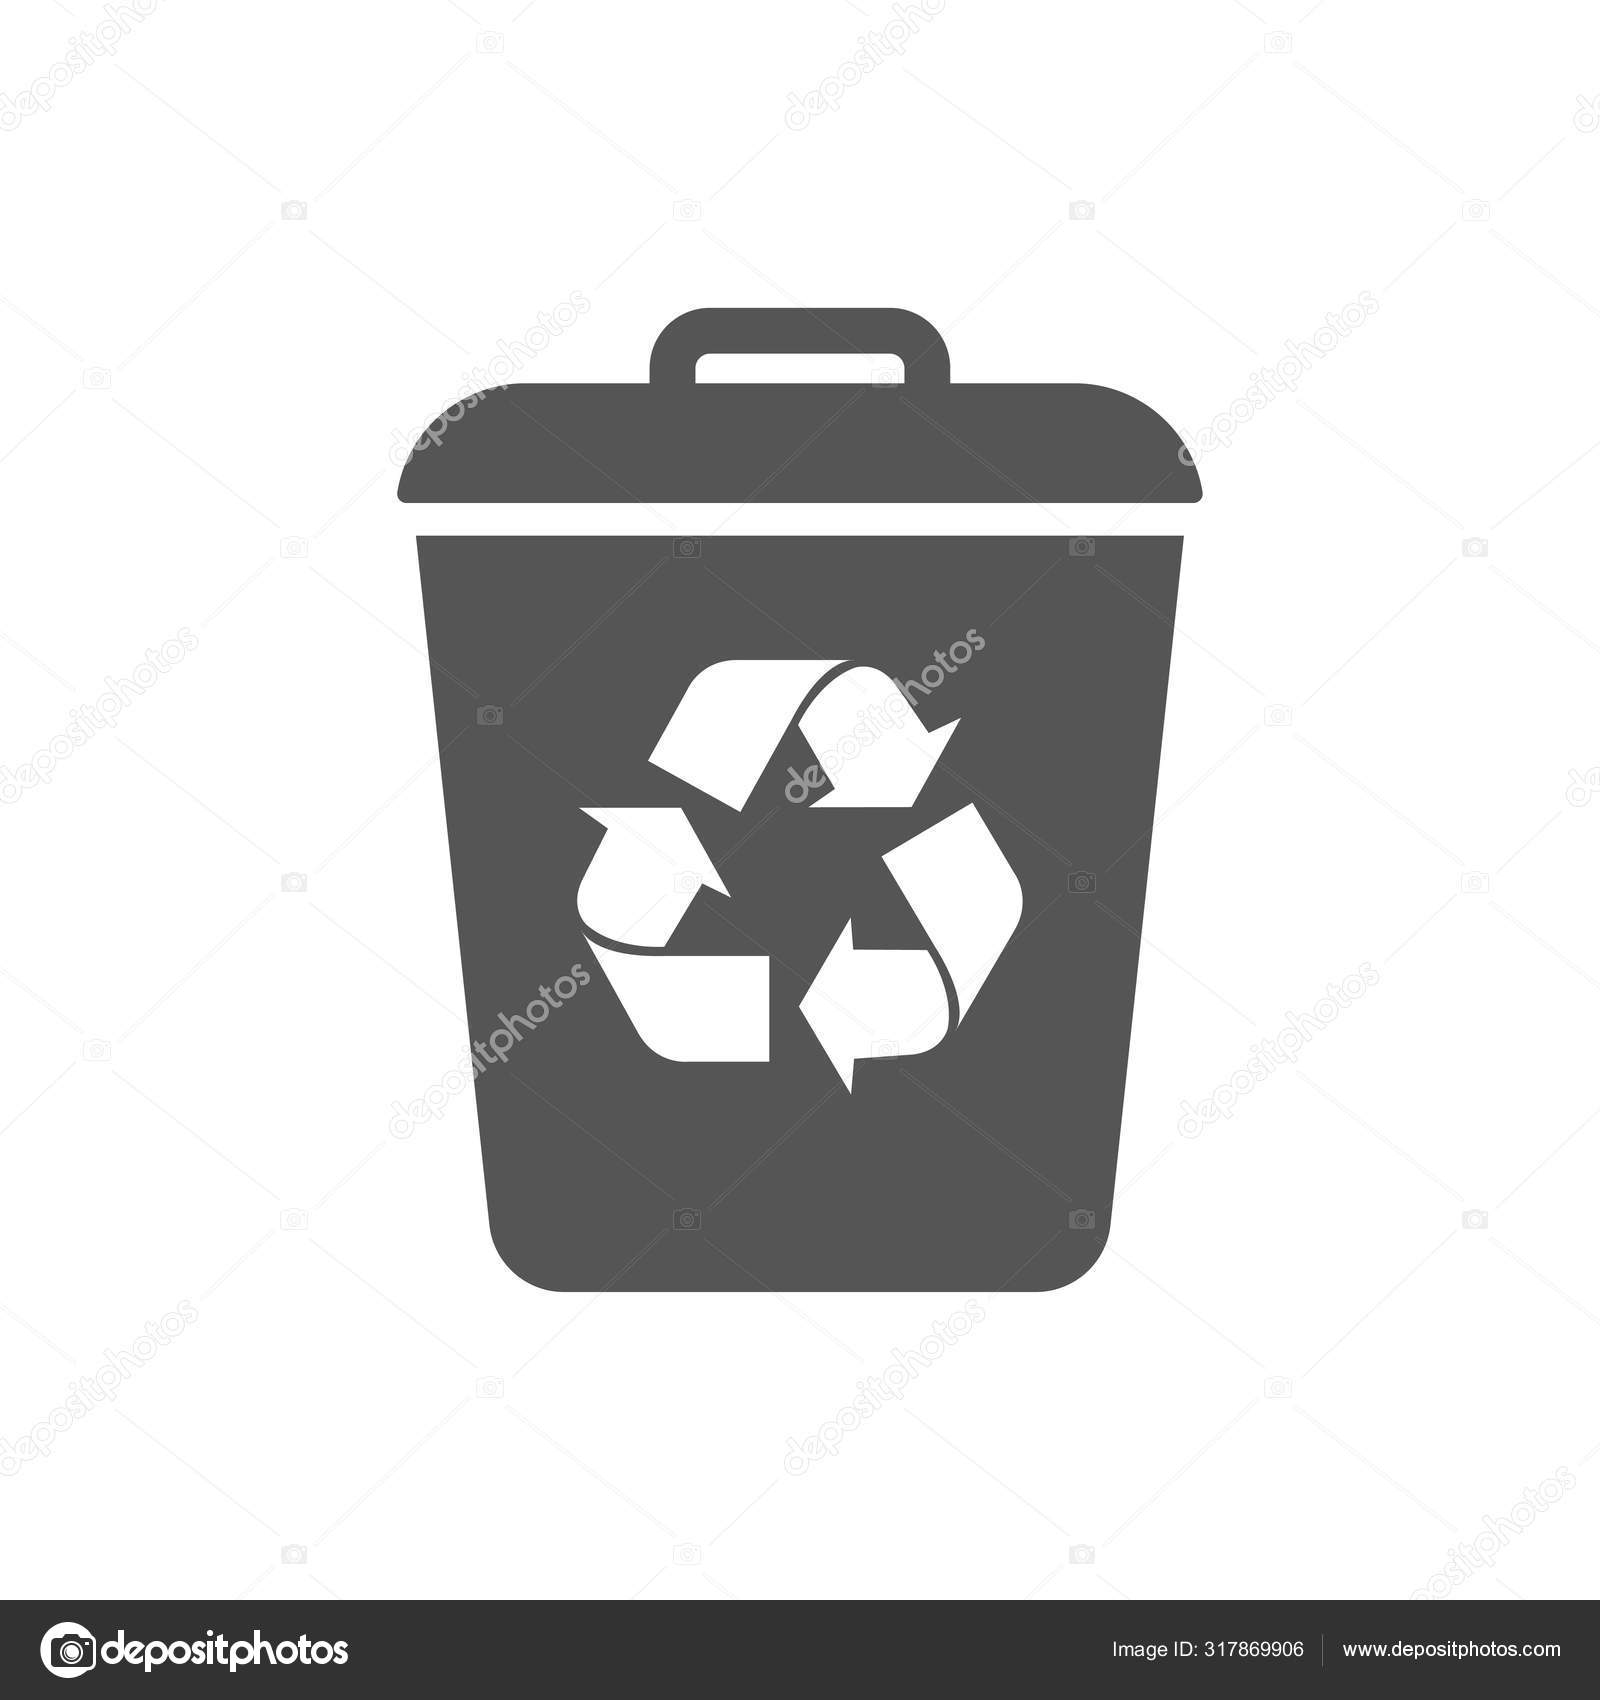 Garbage Trash Can Vector Icon Eco Bio Concept Recycling Flat Design Illustration Isolated On White Background Black Sign For Web Website Eps 10 Vector Image By C Defmorph1 Vector Stock